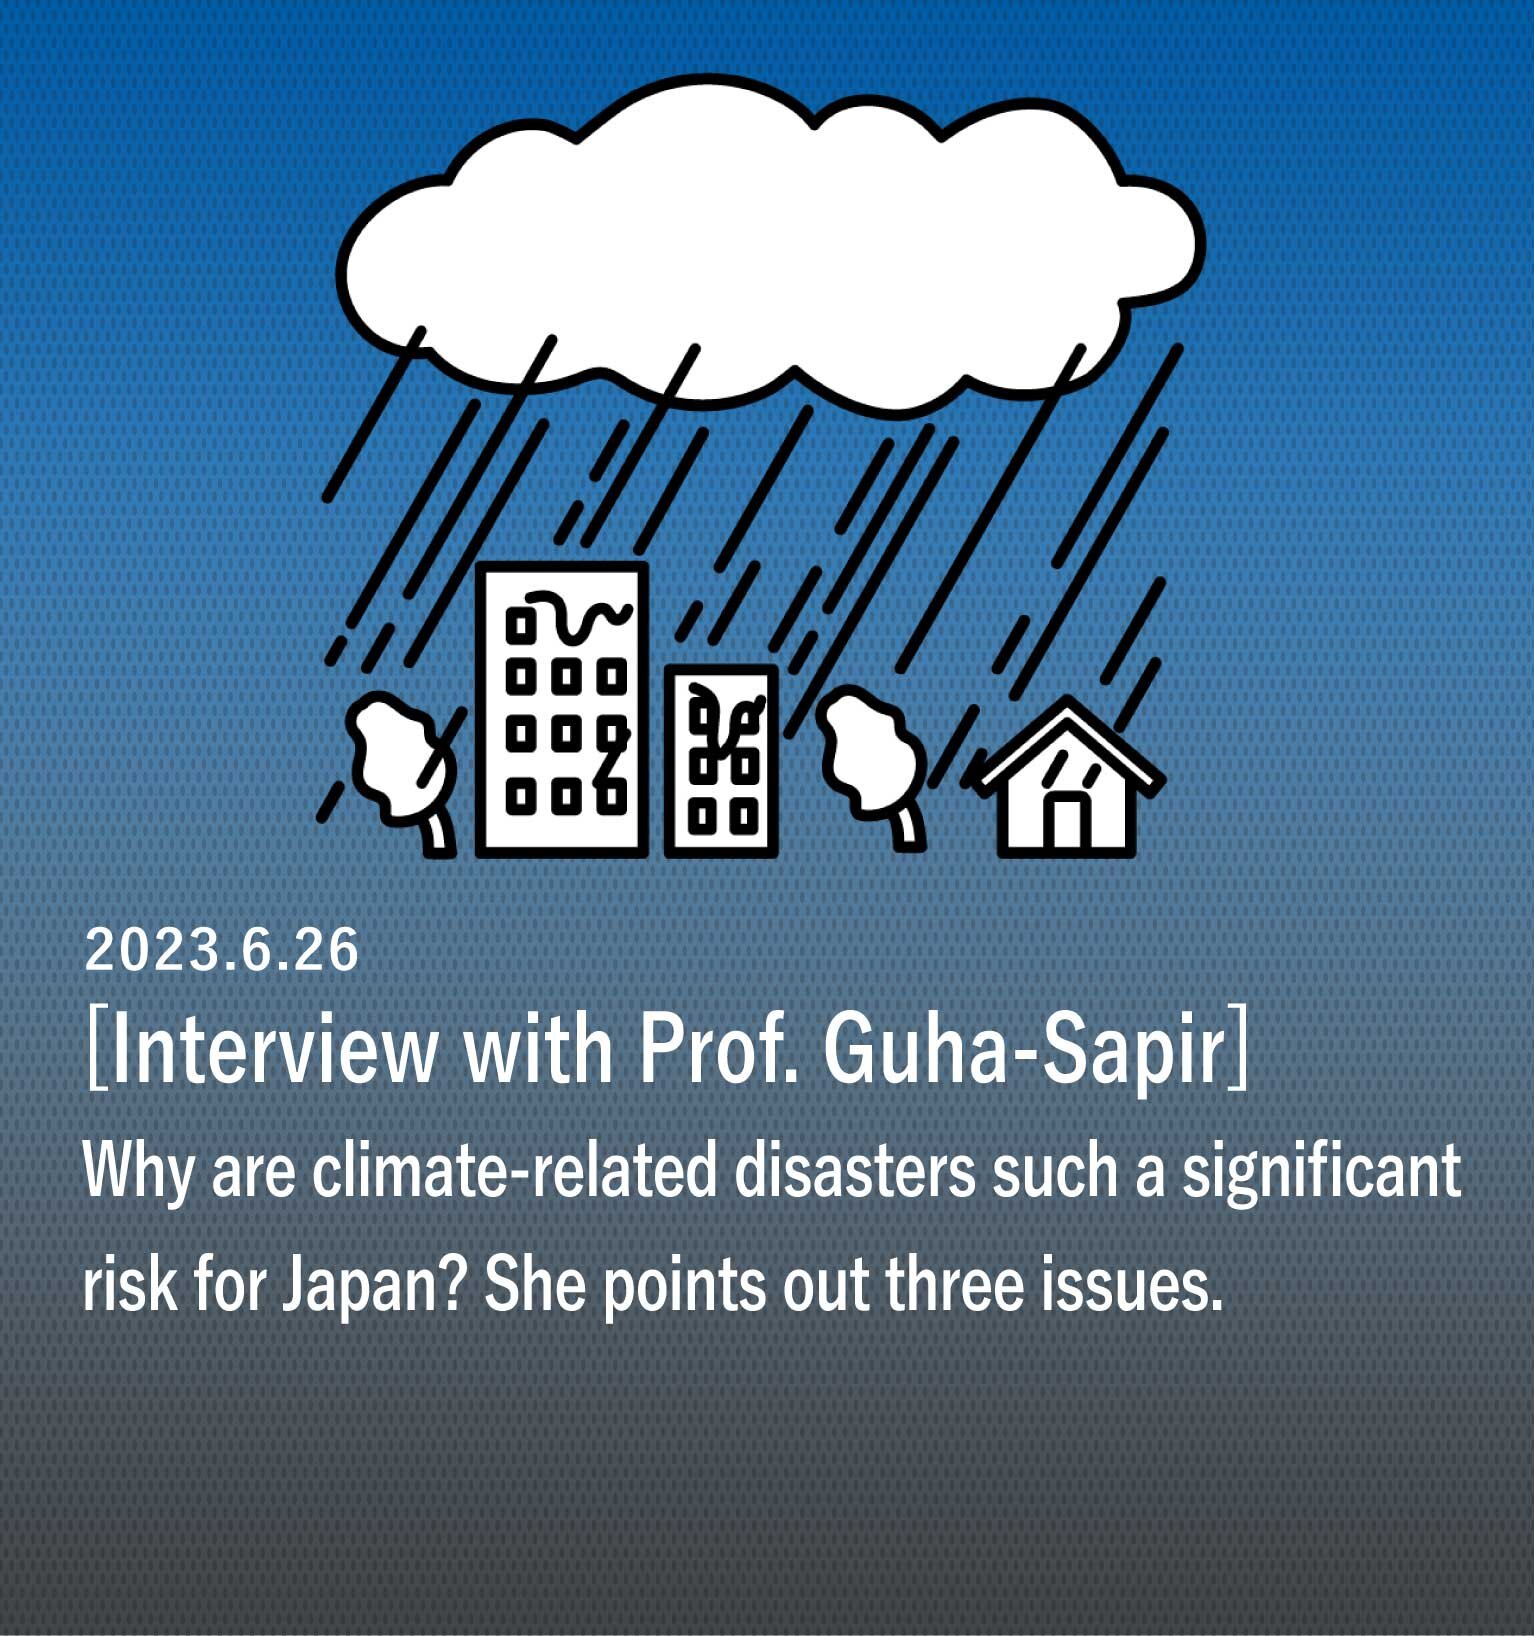 Why are climate-related disasters such a significant risk for Japan? She points out three issues.